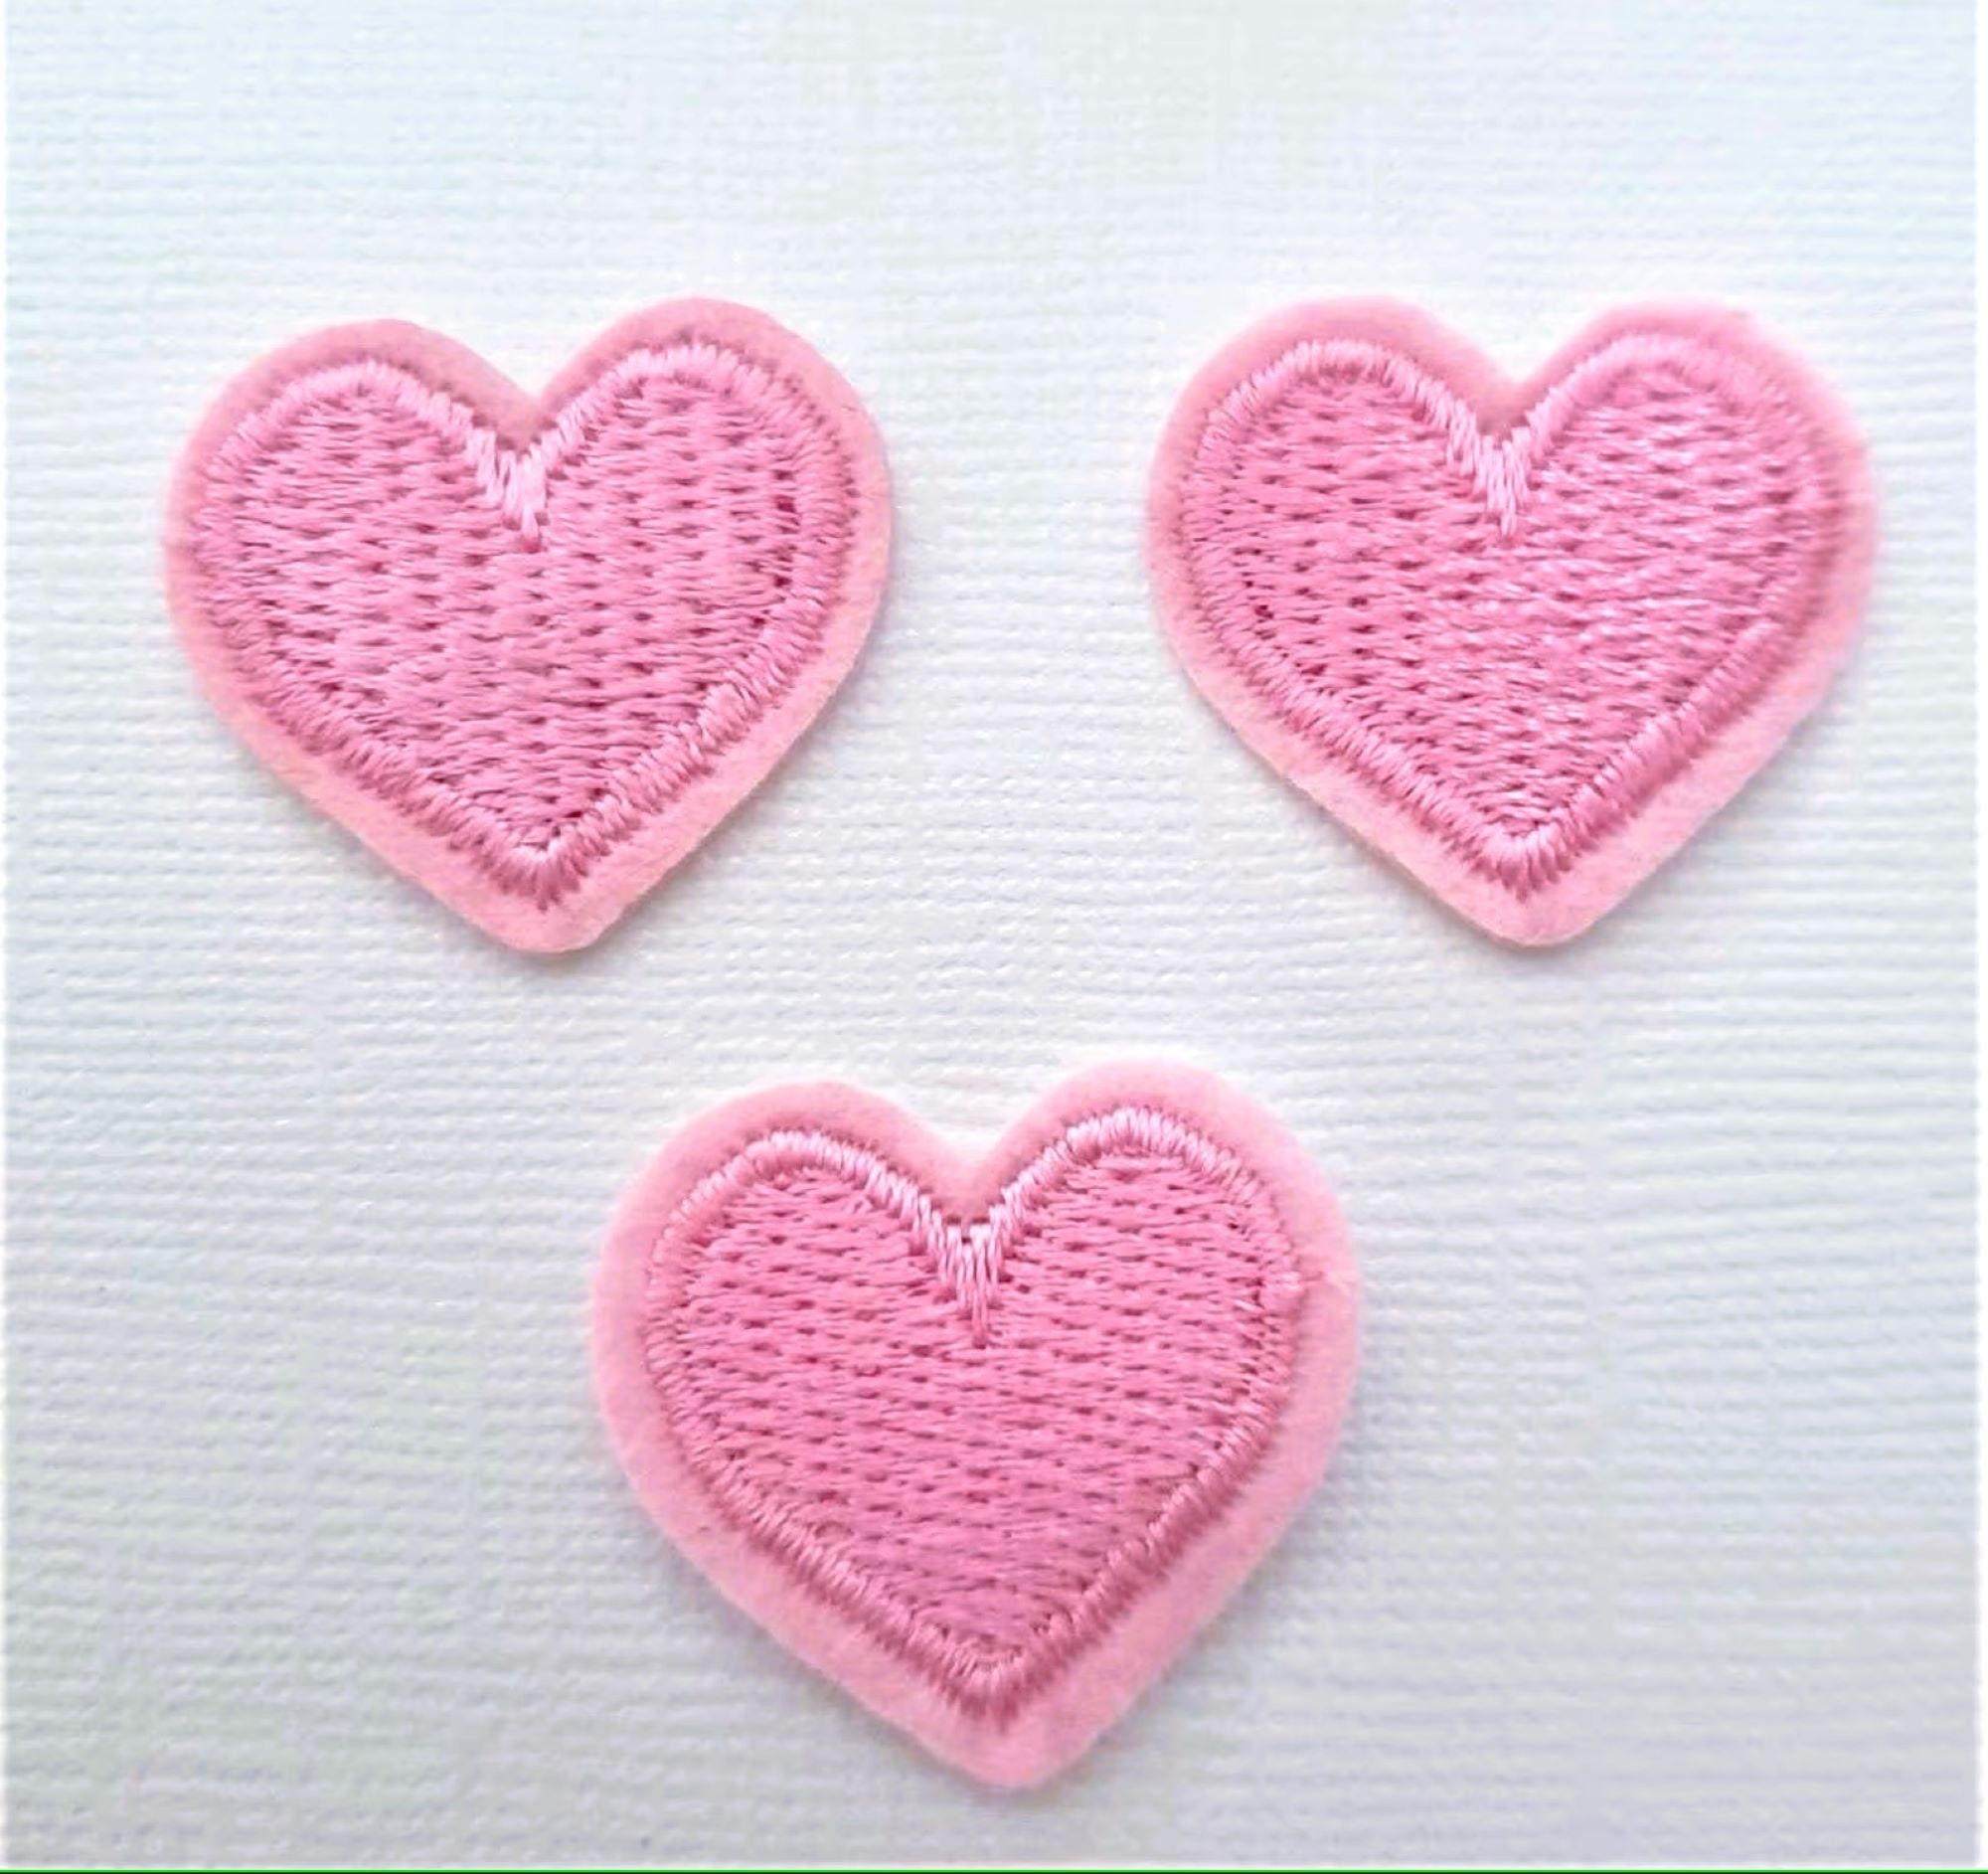 Iron On Patches, Red Hearts for Sewing, DIY Crafts (4 Sizes, 36